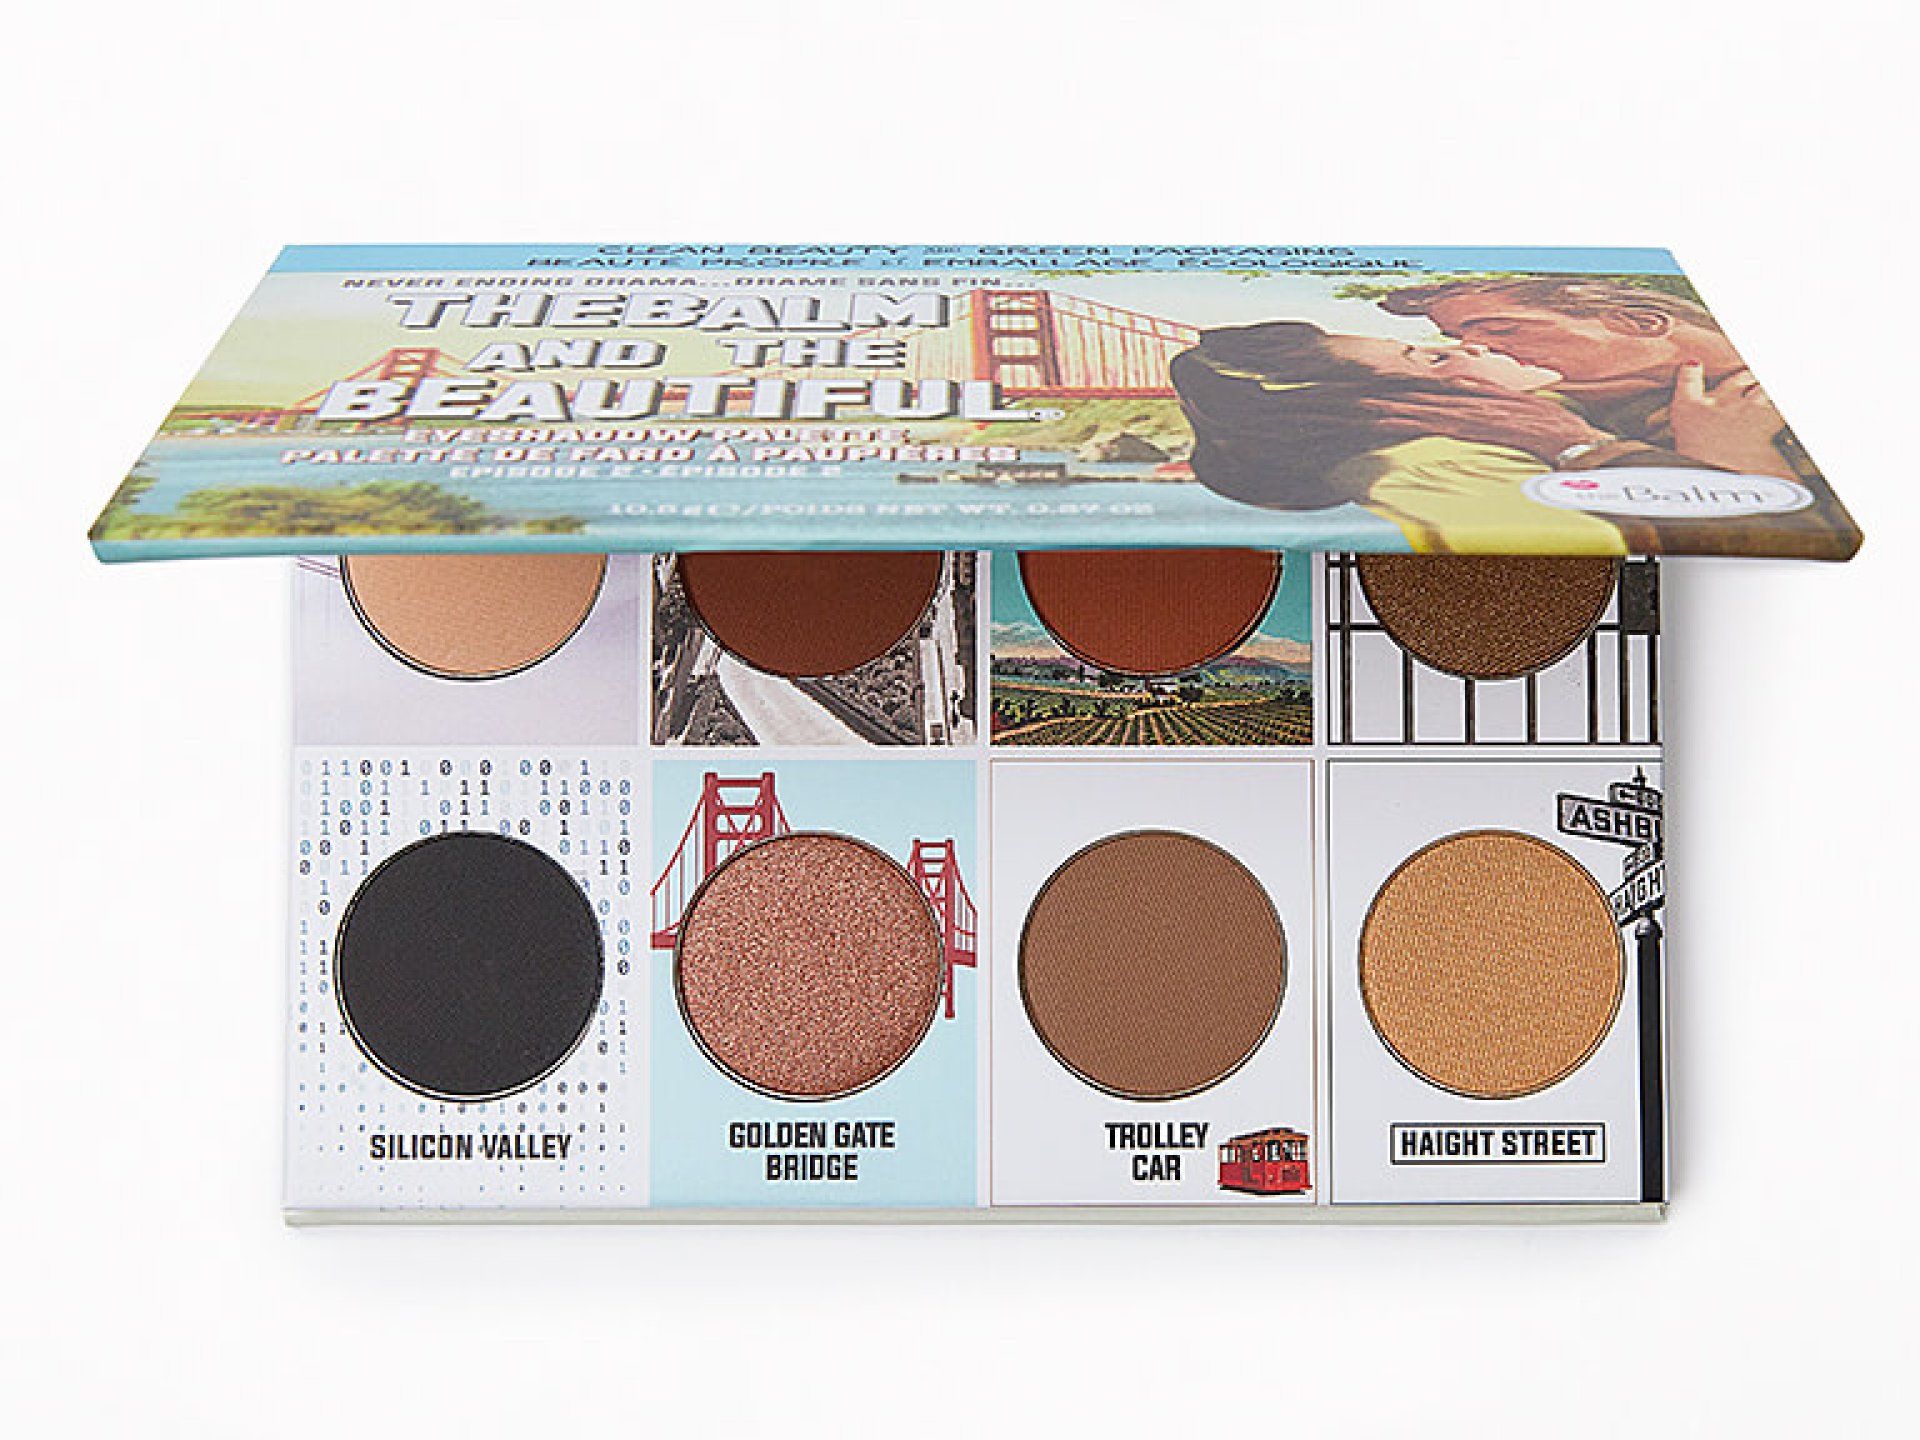 THEBALM COSMETICS The Balm and The Beautiful Episode 2 Palette